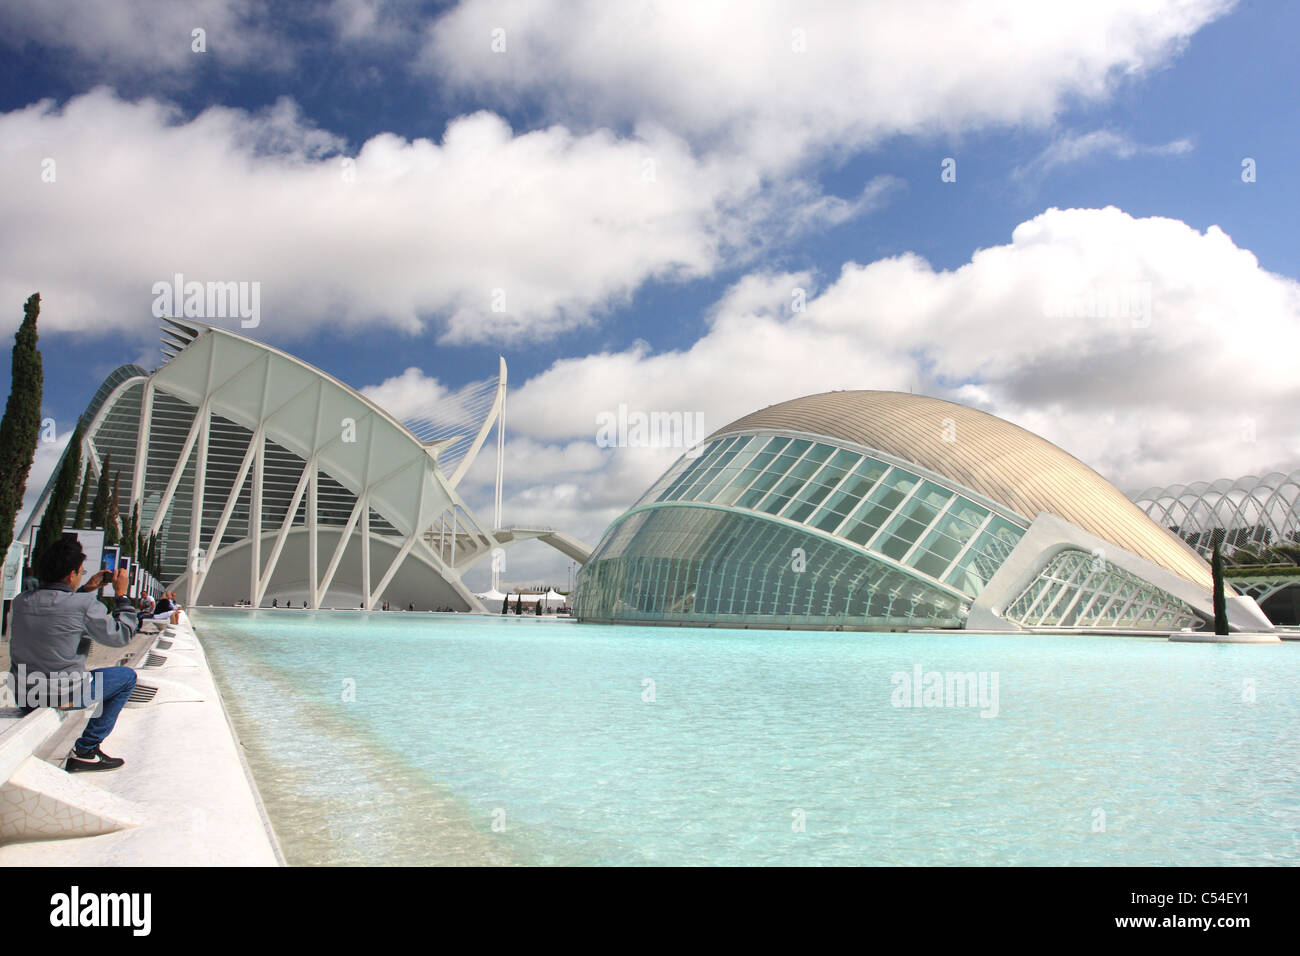 Spain, Valencia, the City of Arts and Sciences building Stock Photo